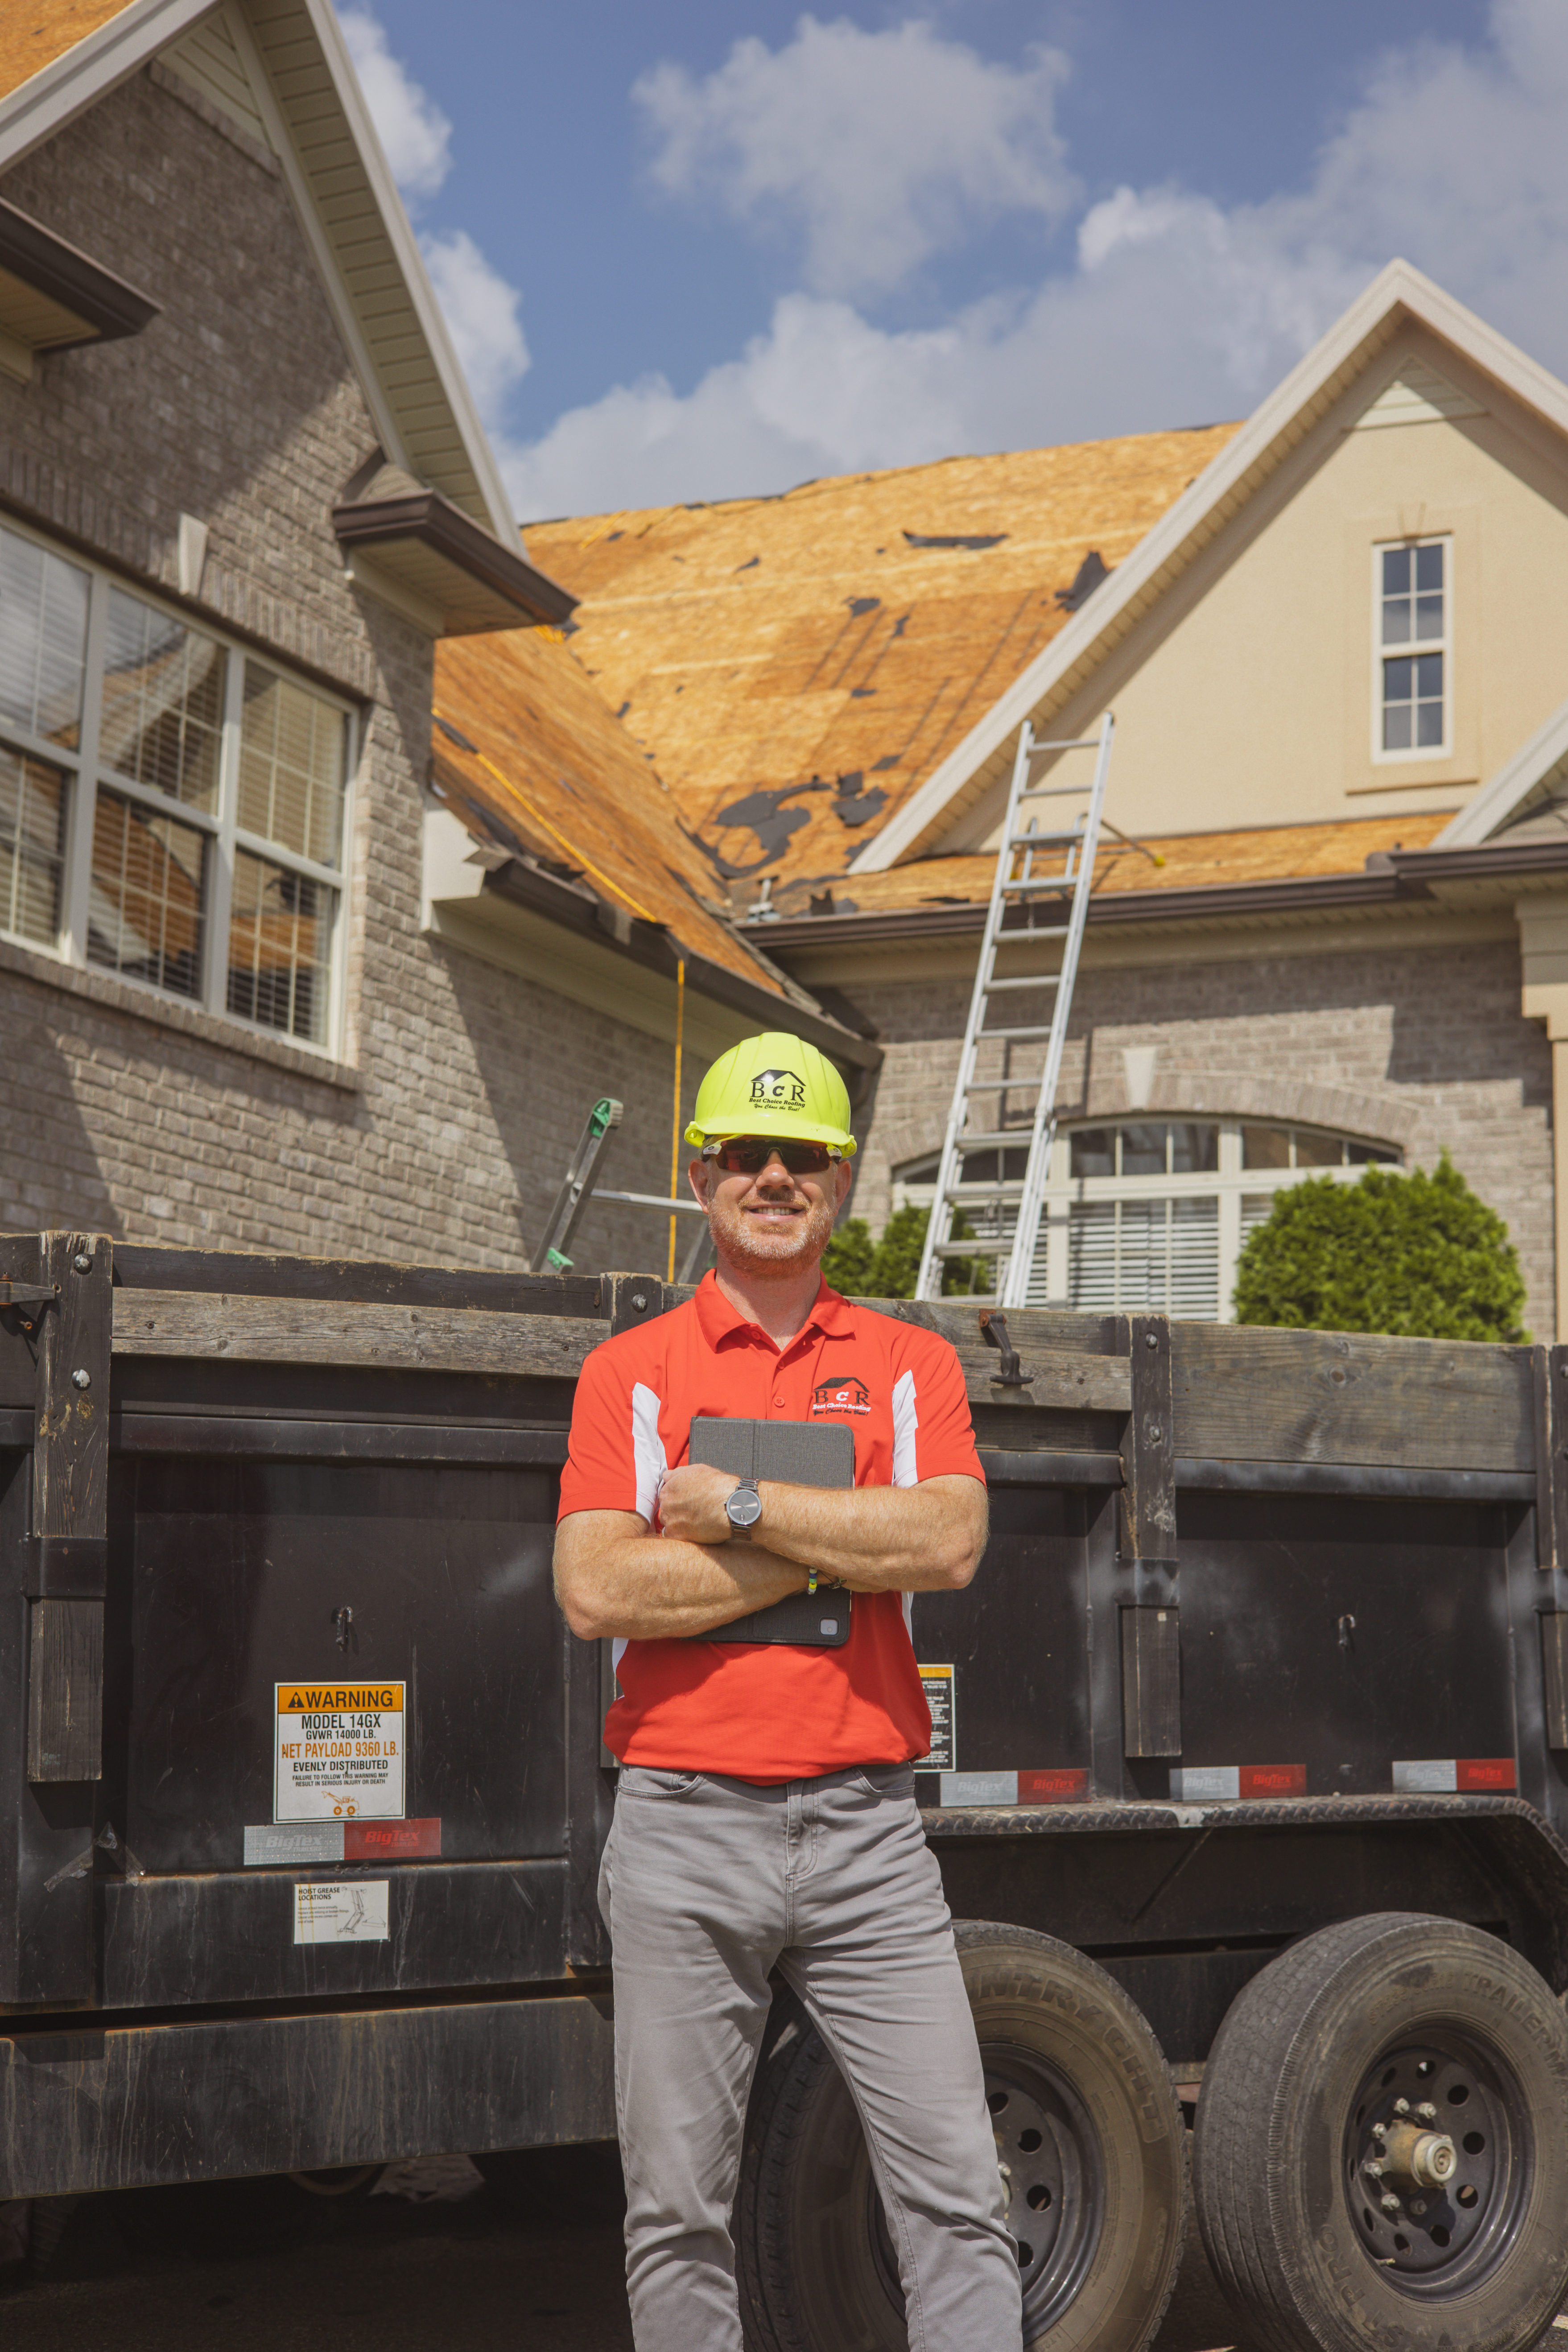 Columbus roofing experts